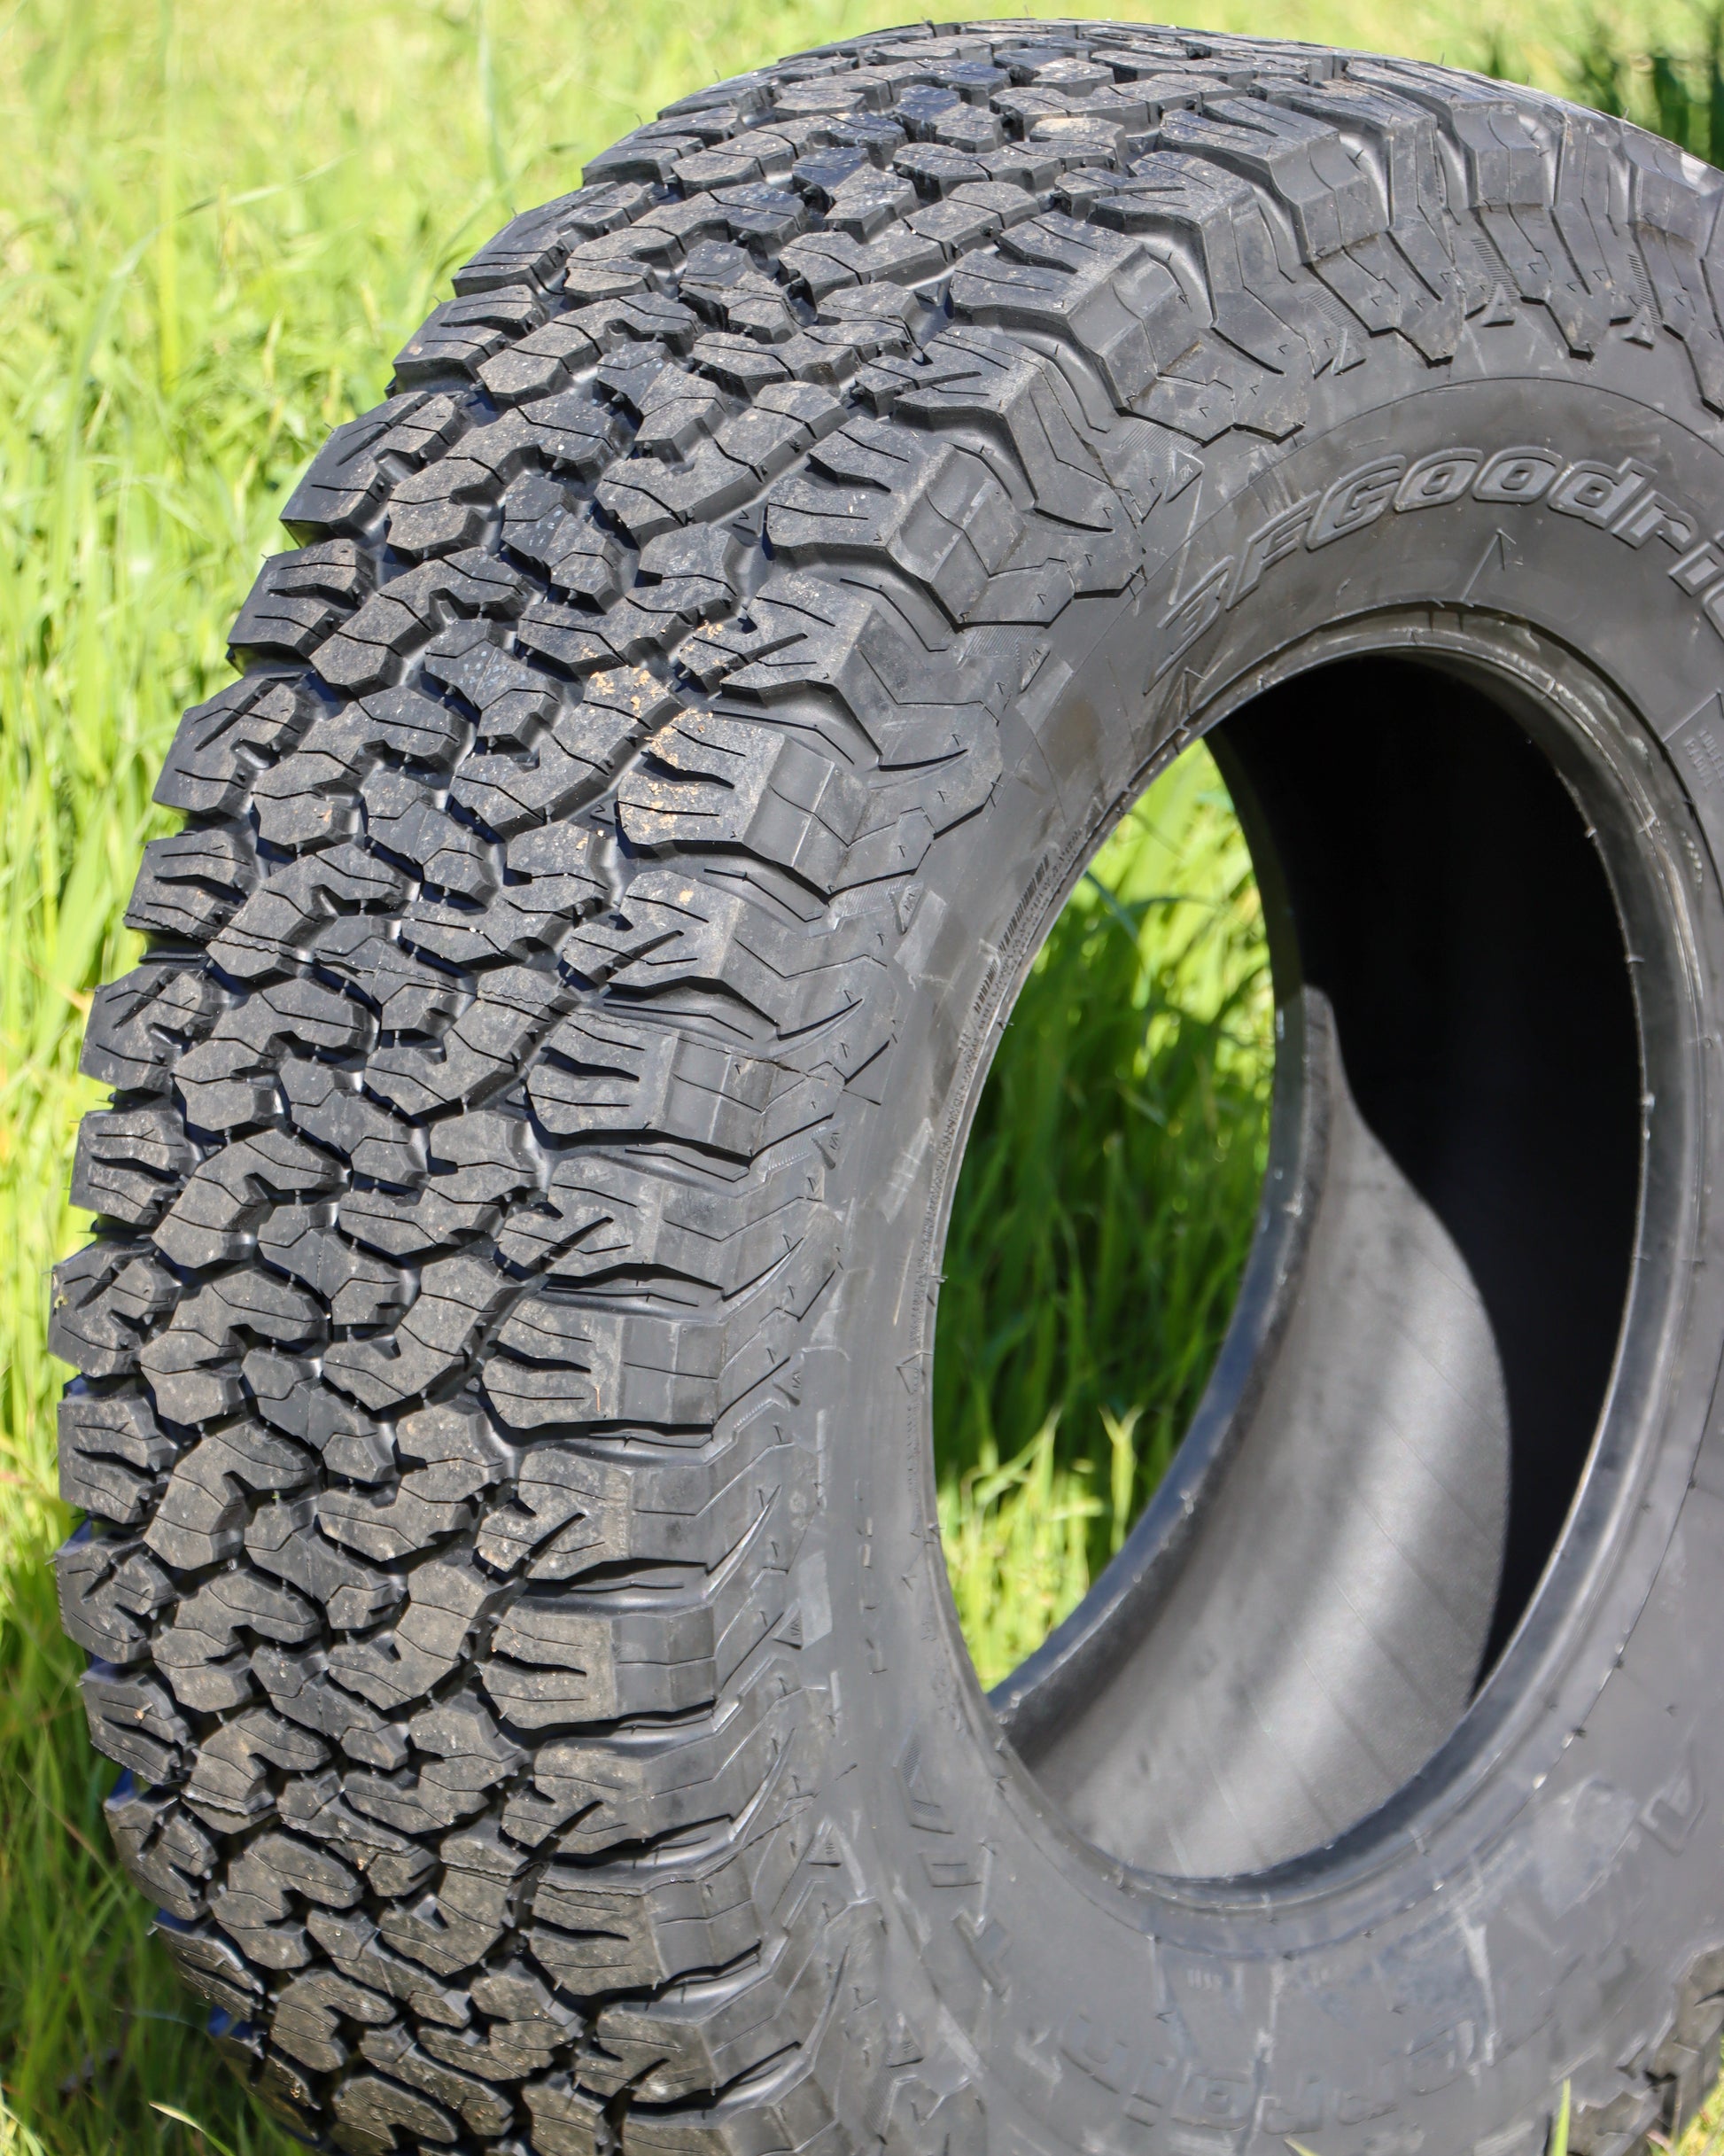 close up of the bfg KO2 all-terrain. tire